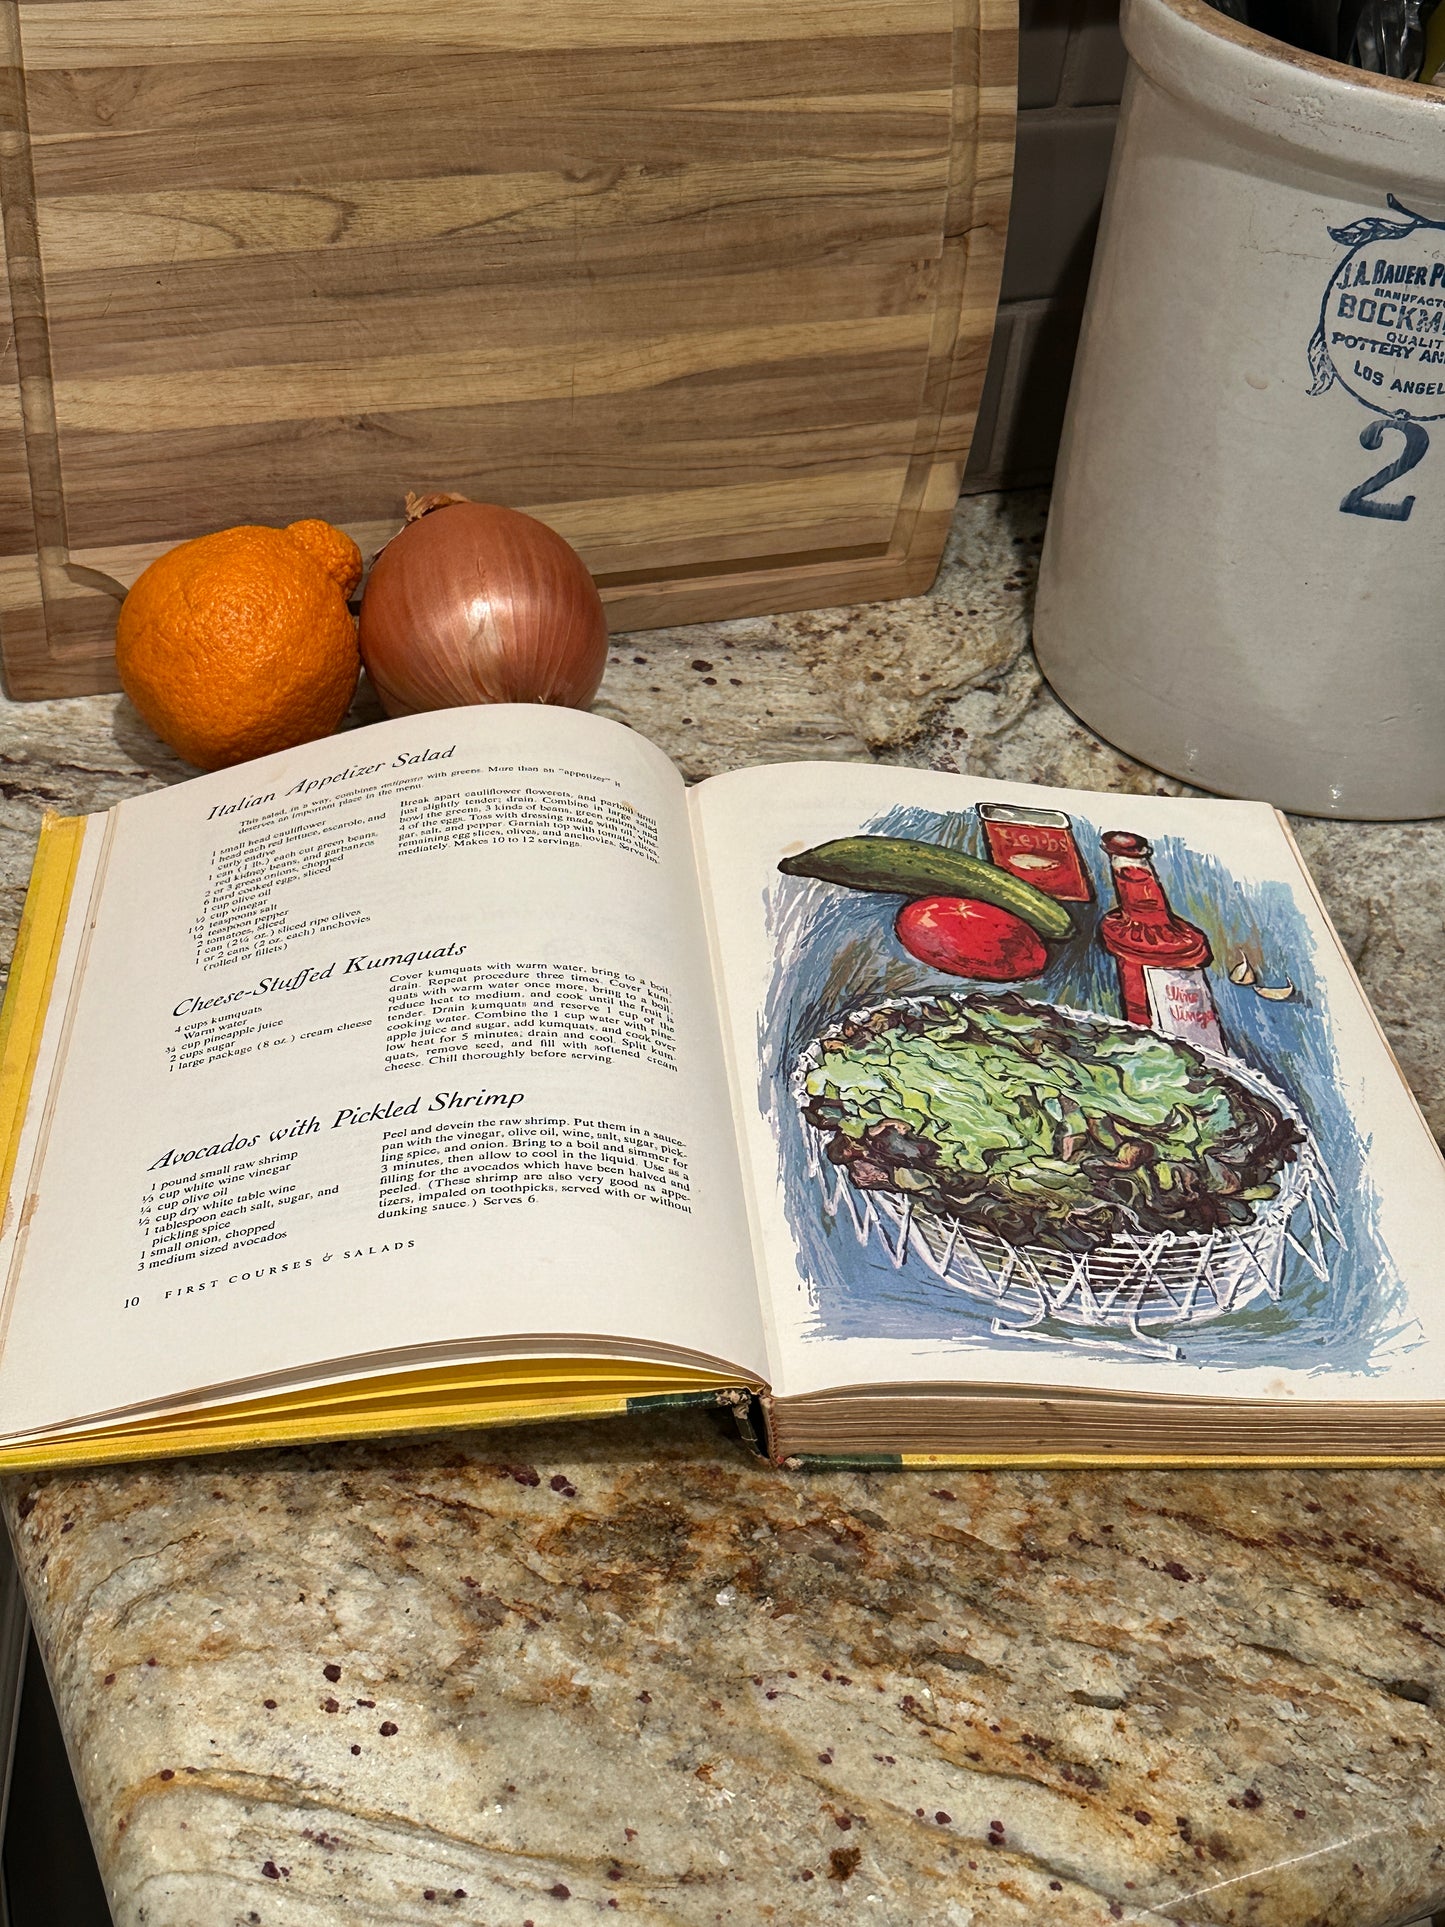 The Sunset Cookbook Hardcover - 1960s